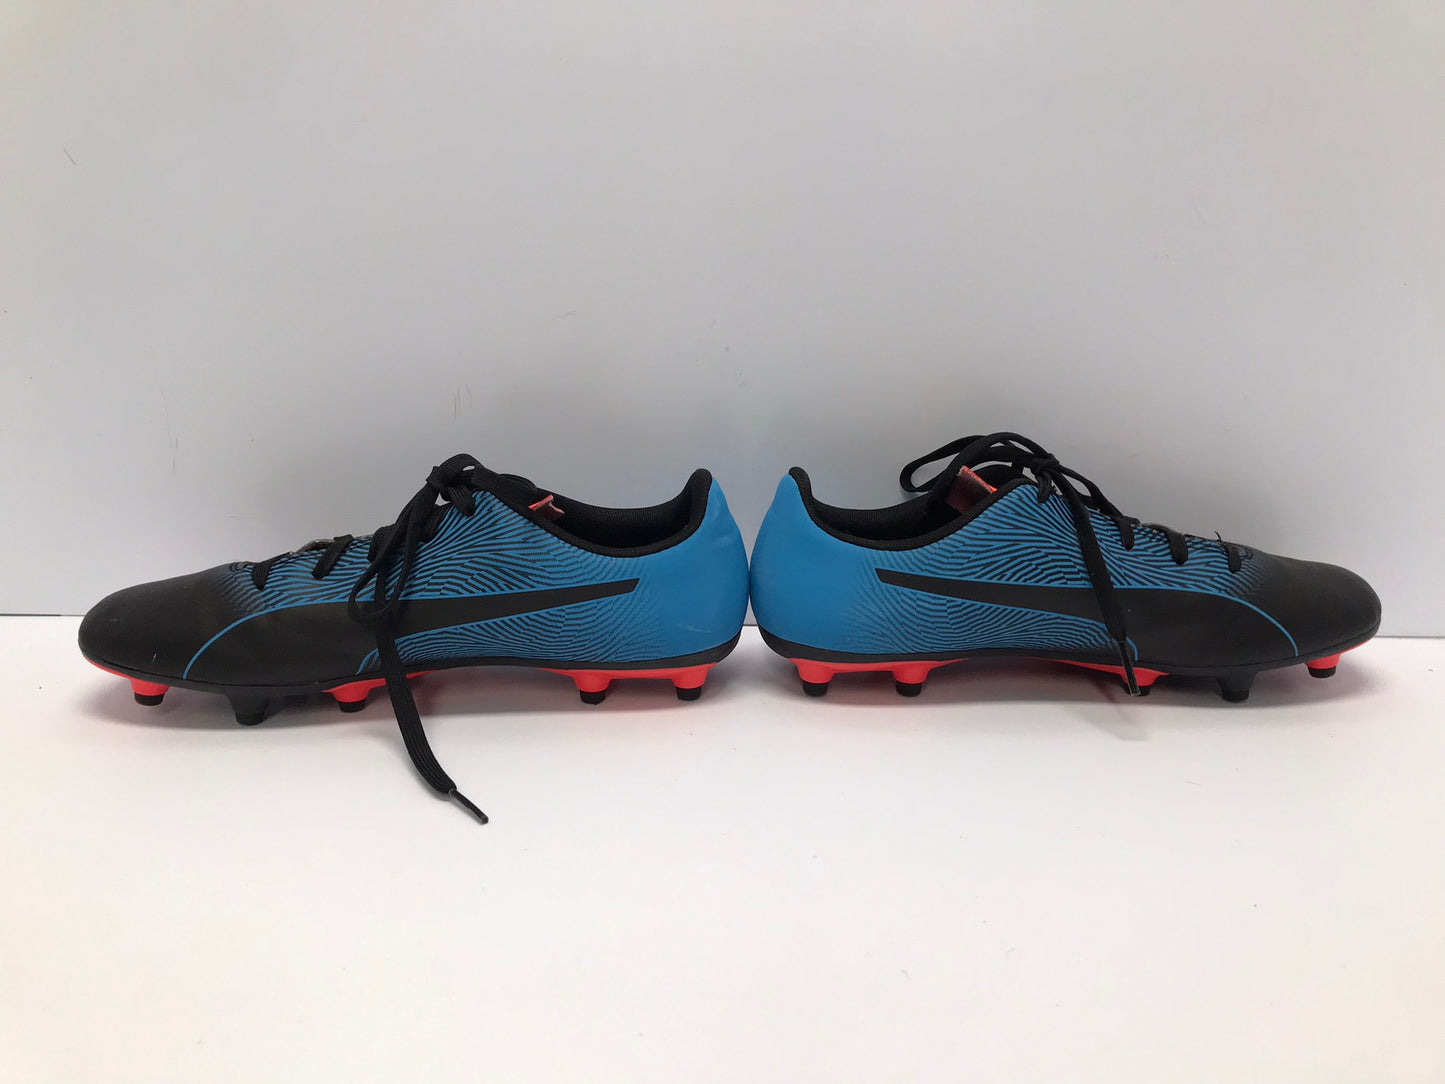 Soccer Shoes Cleats Men's Size 6 Youth Puma Blue Orange Black As New